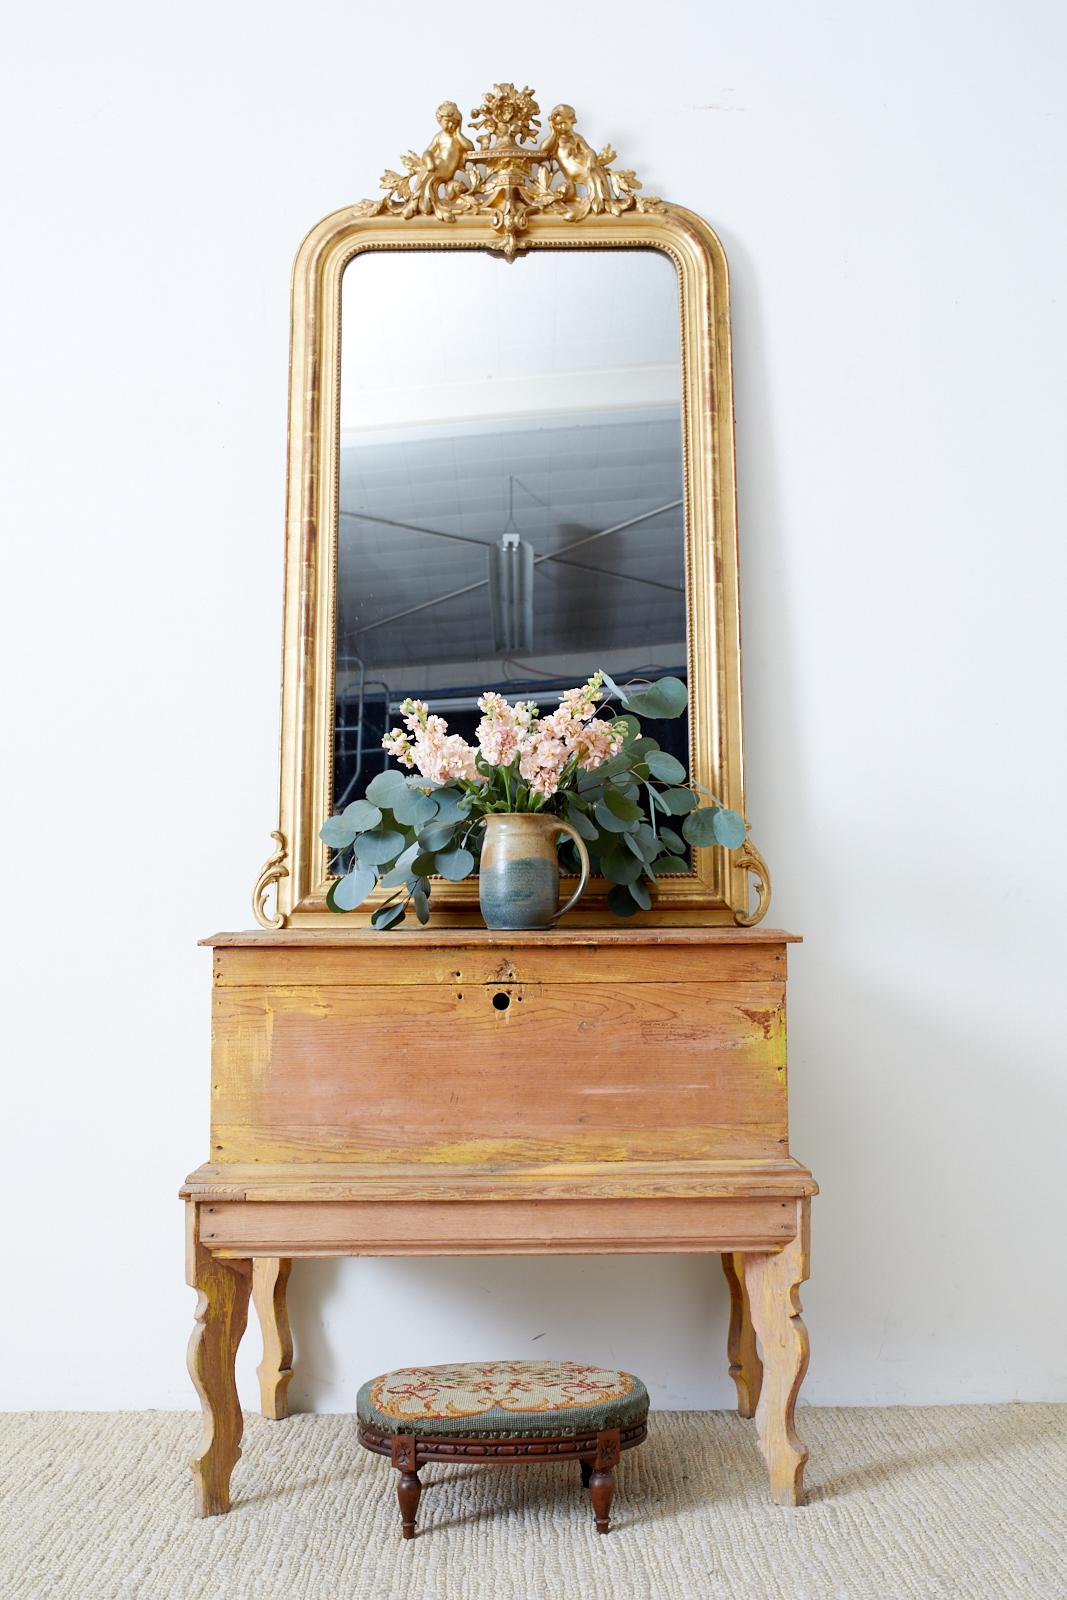 Grand 19th century giltwood mirror made in the French Louis Philippe taste. Features a distinctive gesso crest centered by an urn with floral sprays. Flanked on each side are beautiful cherub figures resting on the urn adorned with acanthus. The